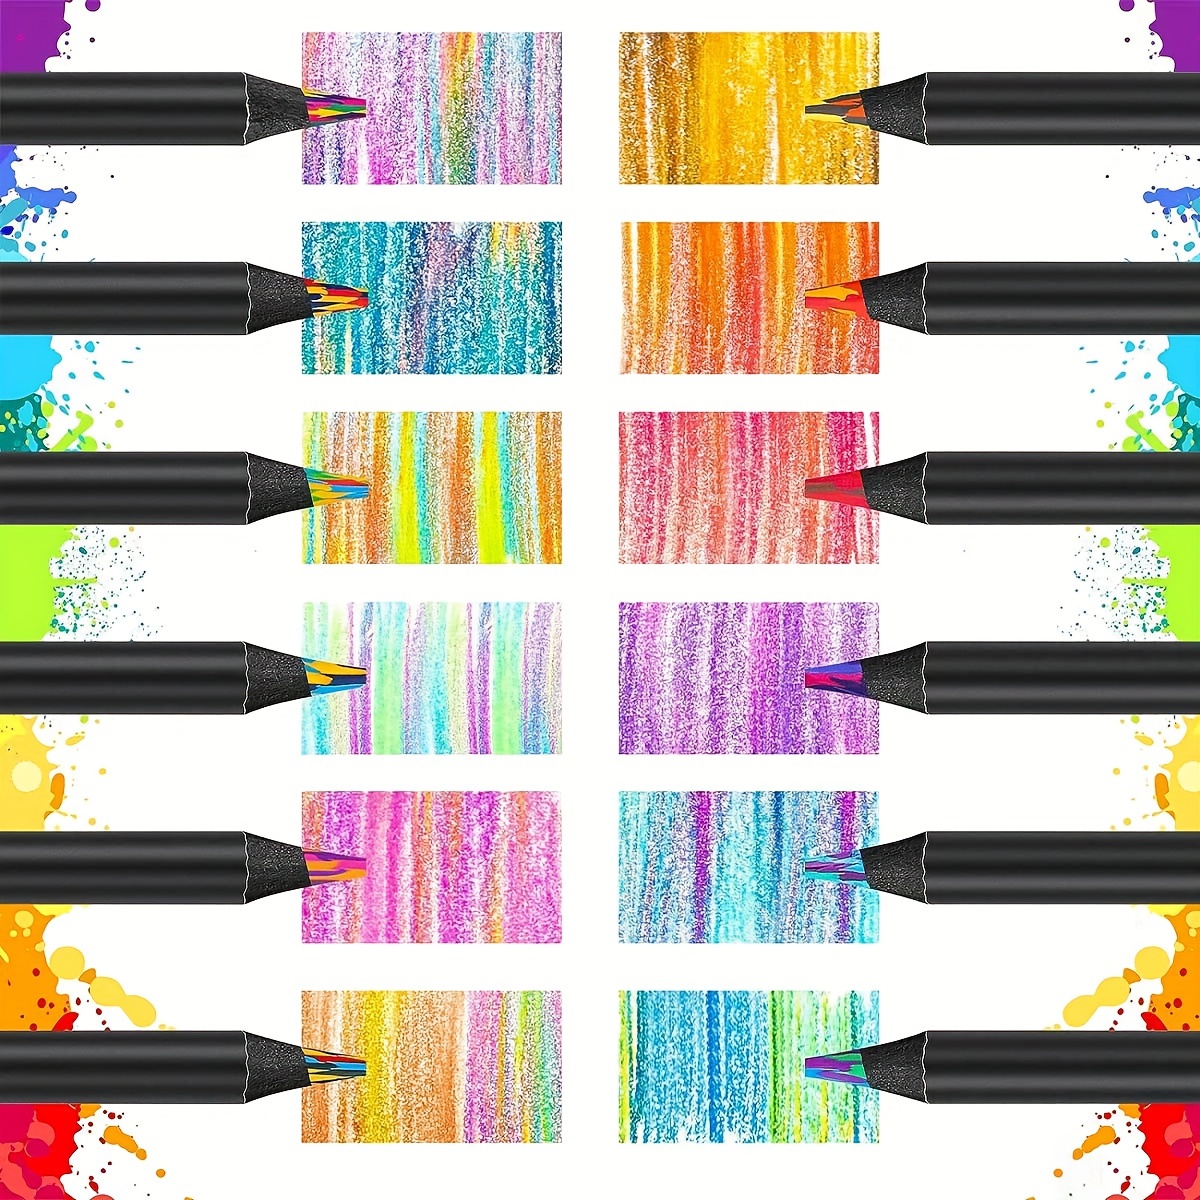  Professional Art Supplies For Artists